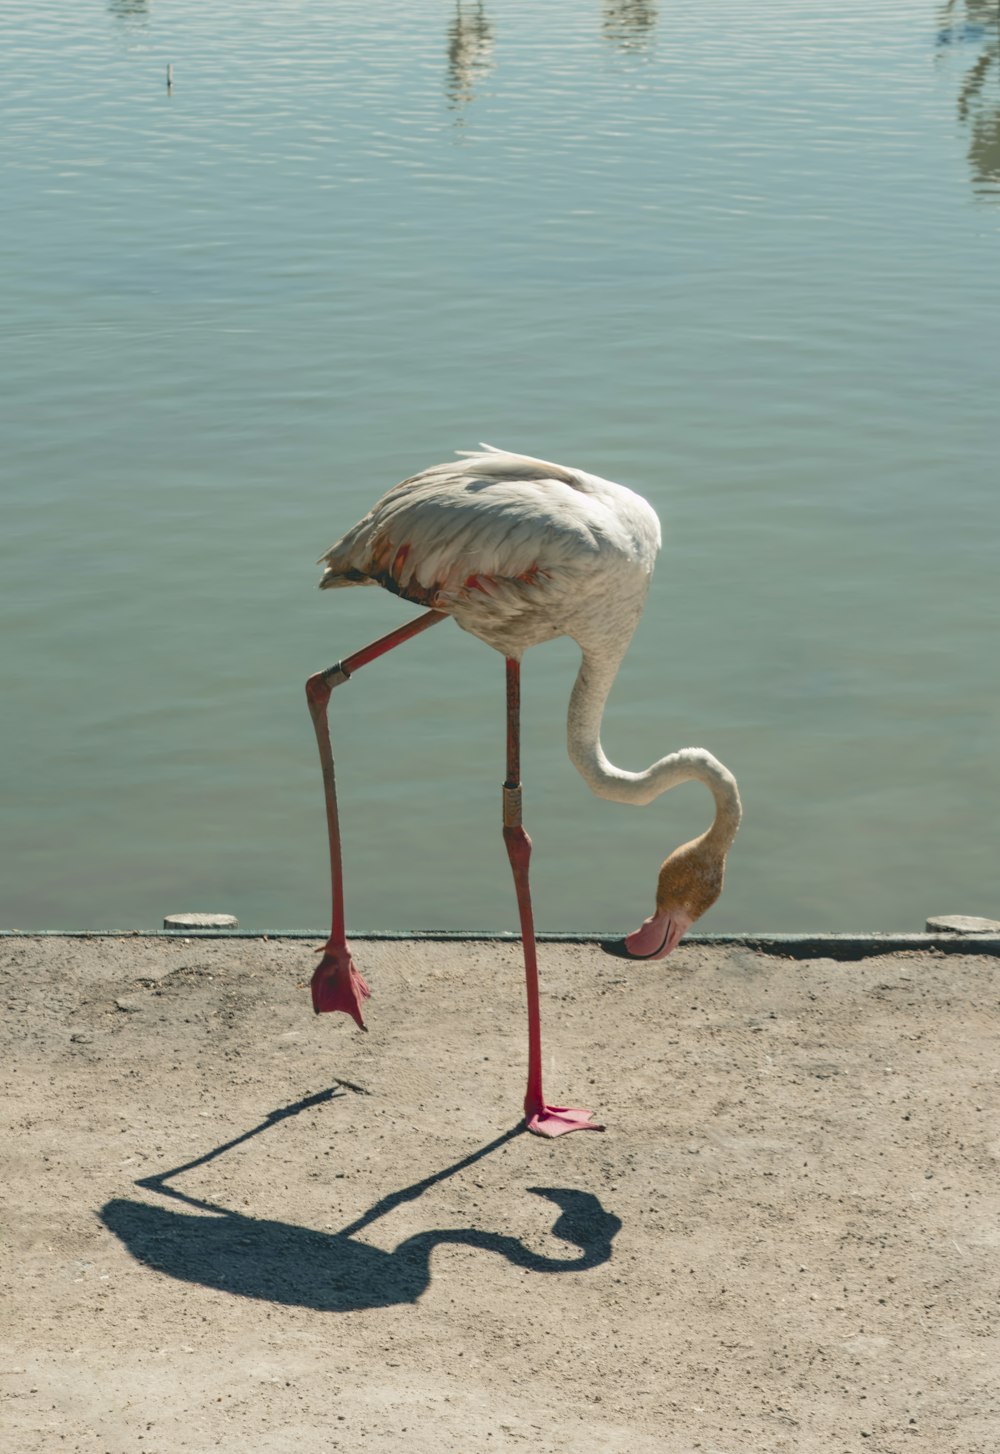 a flamingo standing on a concrete ledge next to a body of water